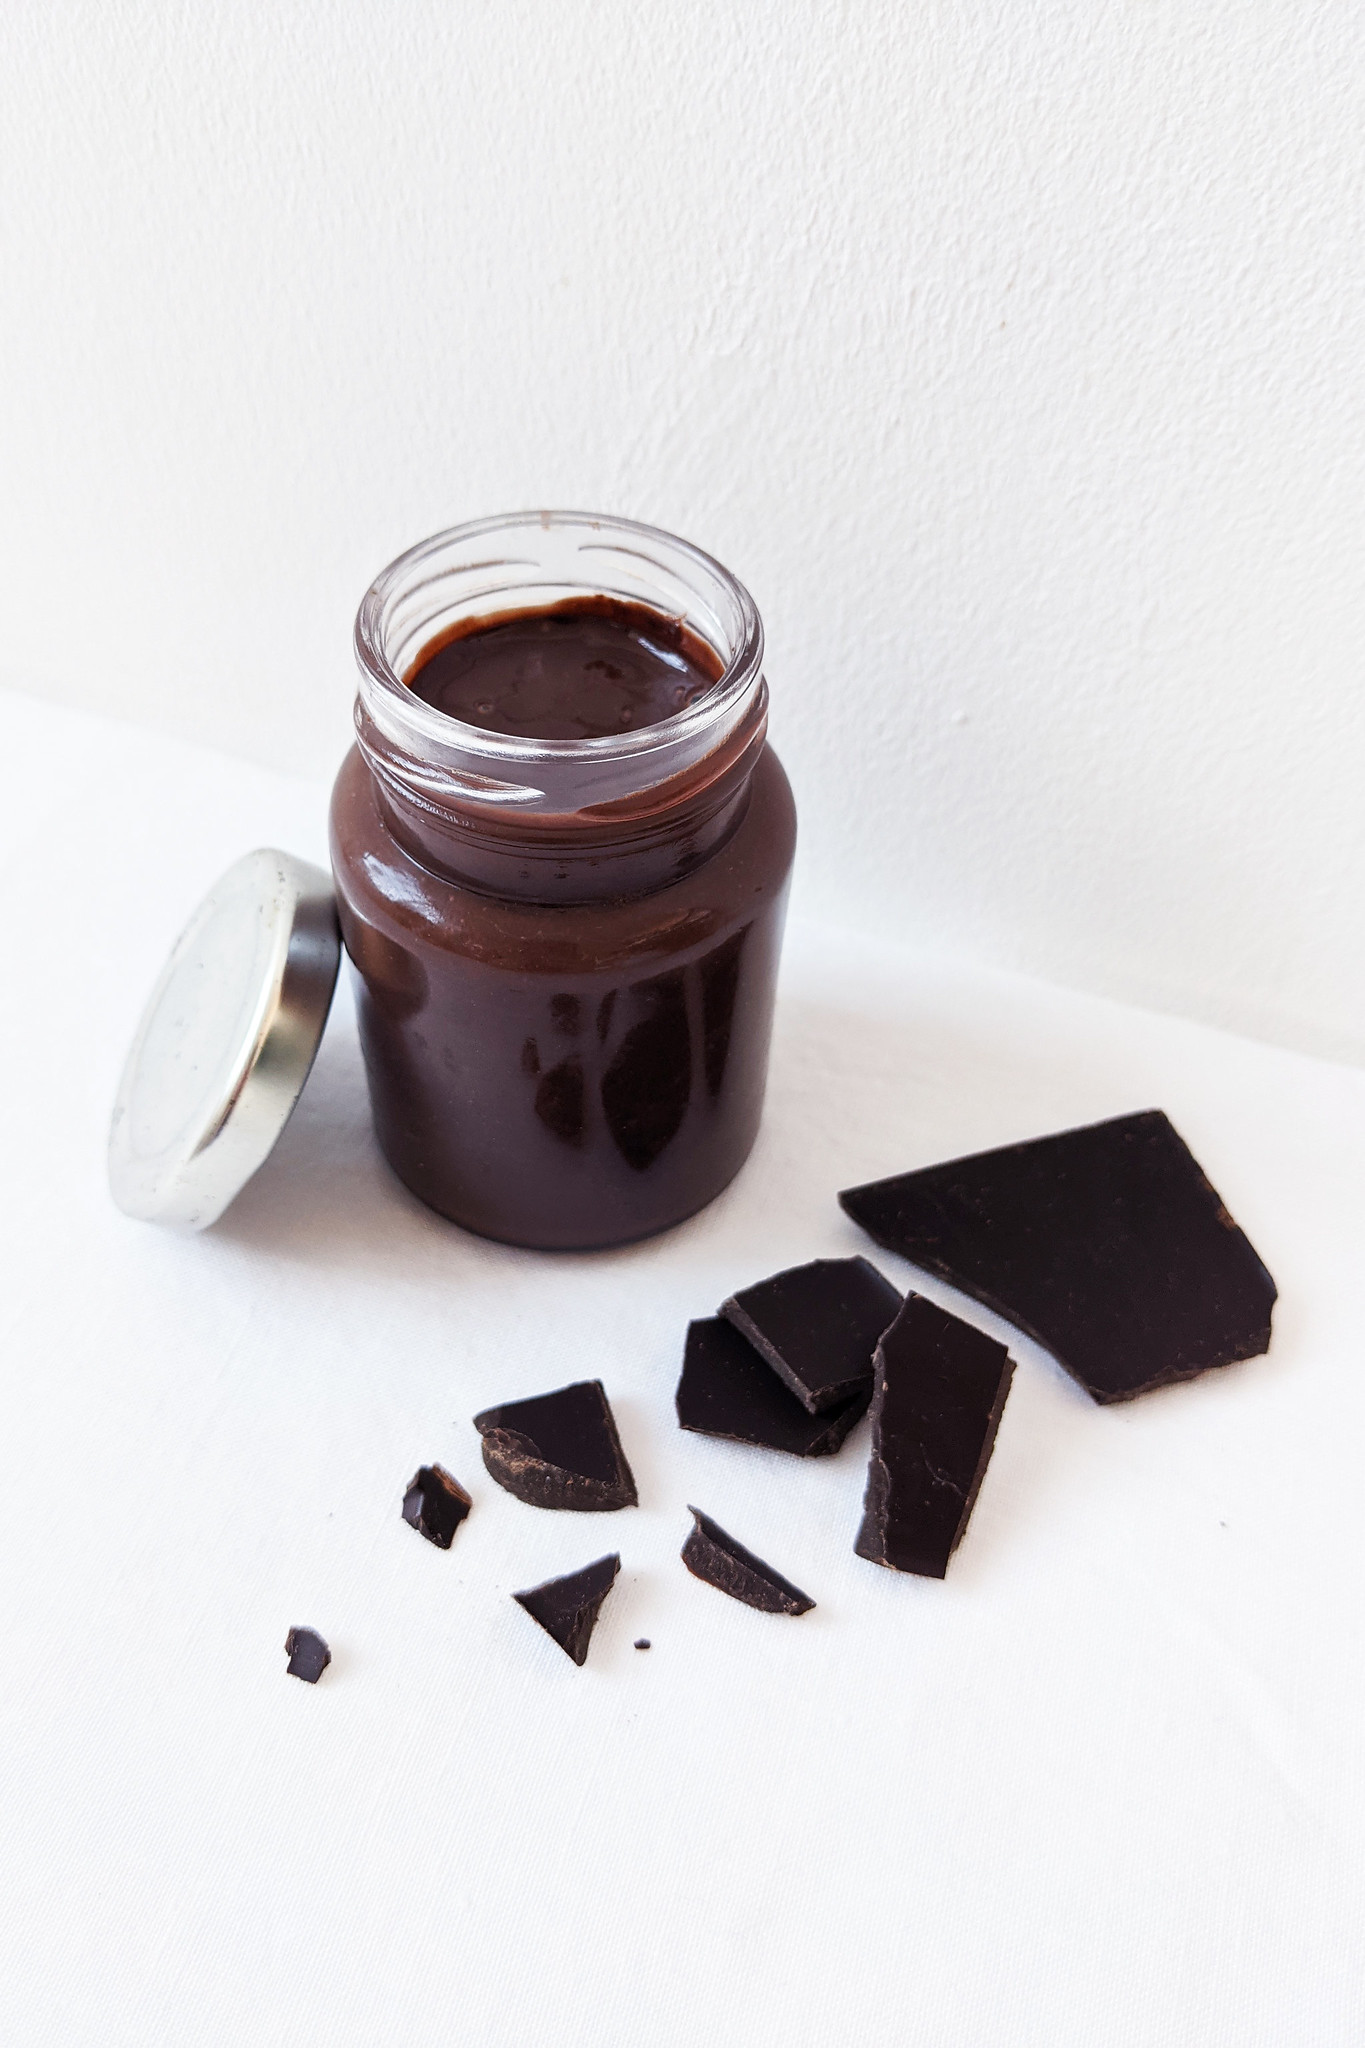 A Recipe For Low Waste Vegan Friendly Chocolate Spread